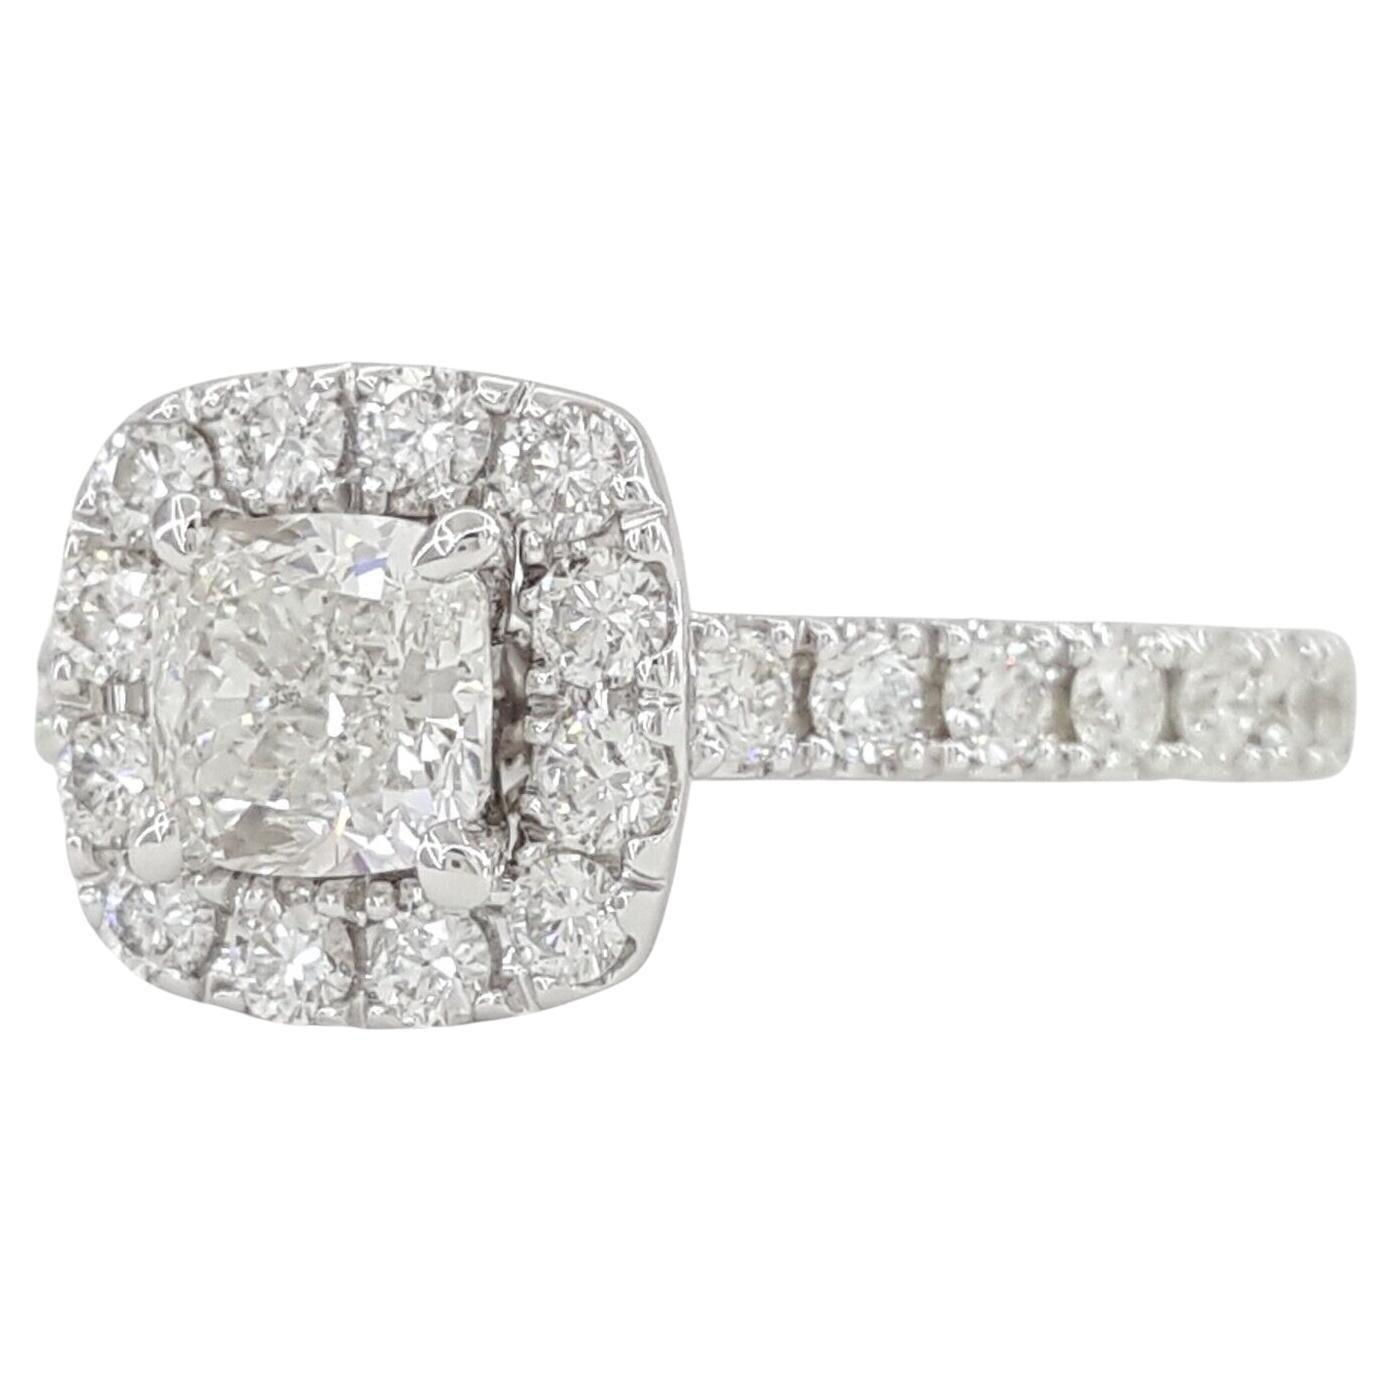 Neil Lane Bridal® Collection, a stunning 1.38-carat total weight engagement ring featuring a Cushion Cut diamond halo set in 14k White Gold.

This exquisite ring weighs 4.5 grams and is sized at 6.75. The centerpiece is a natural Cushion Brilliant